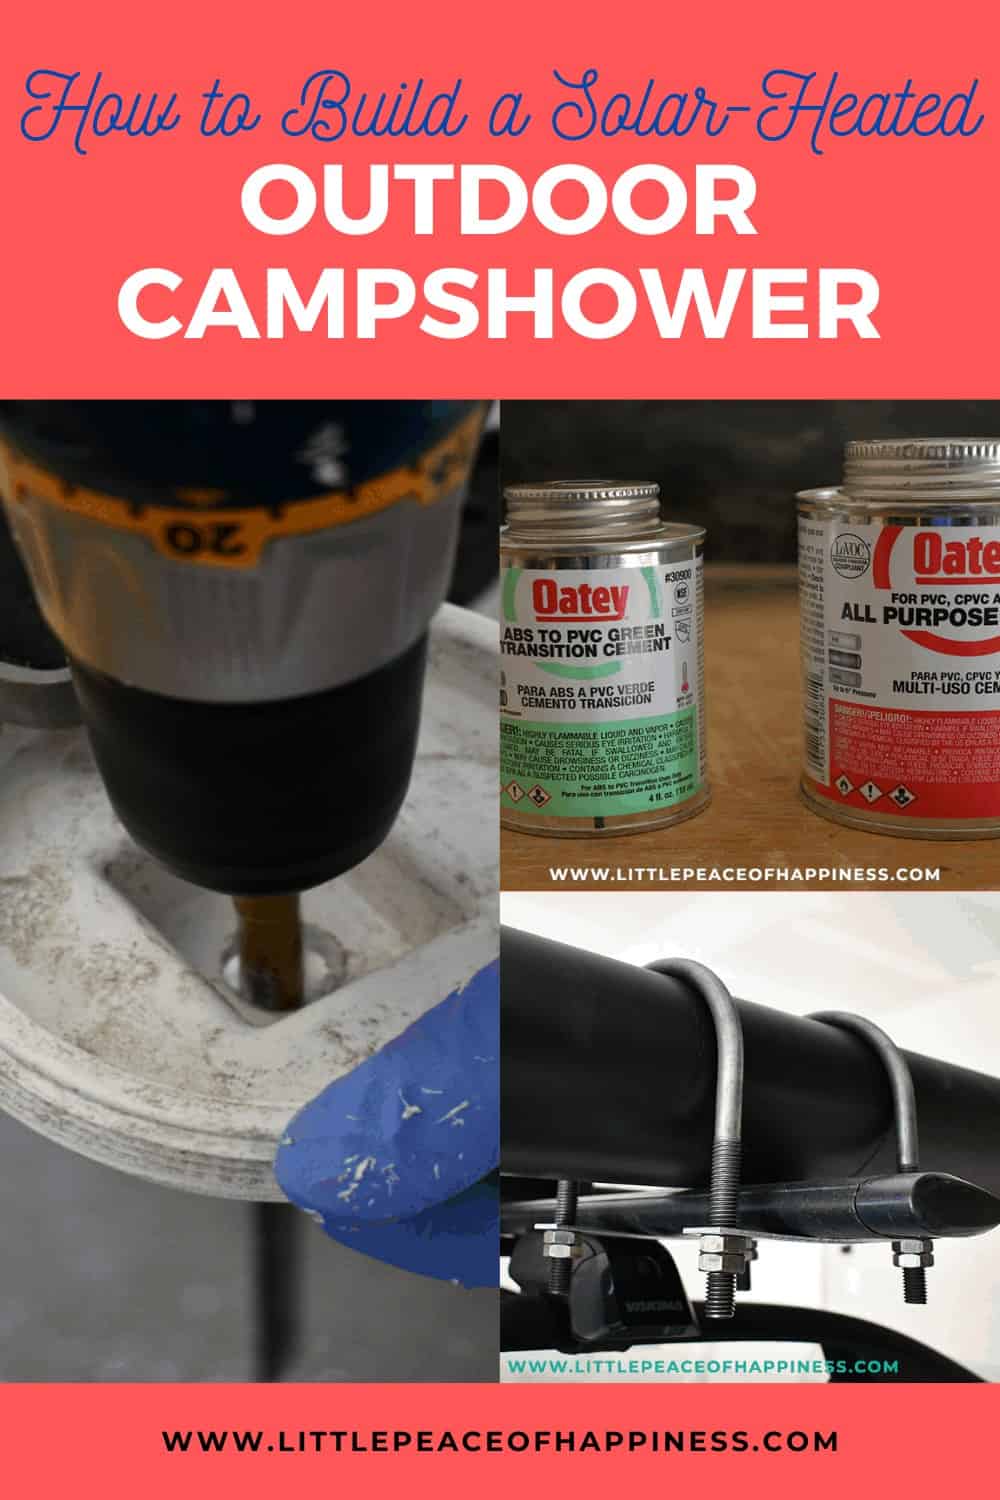 How to Build a Camp Shower on a budget